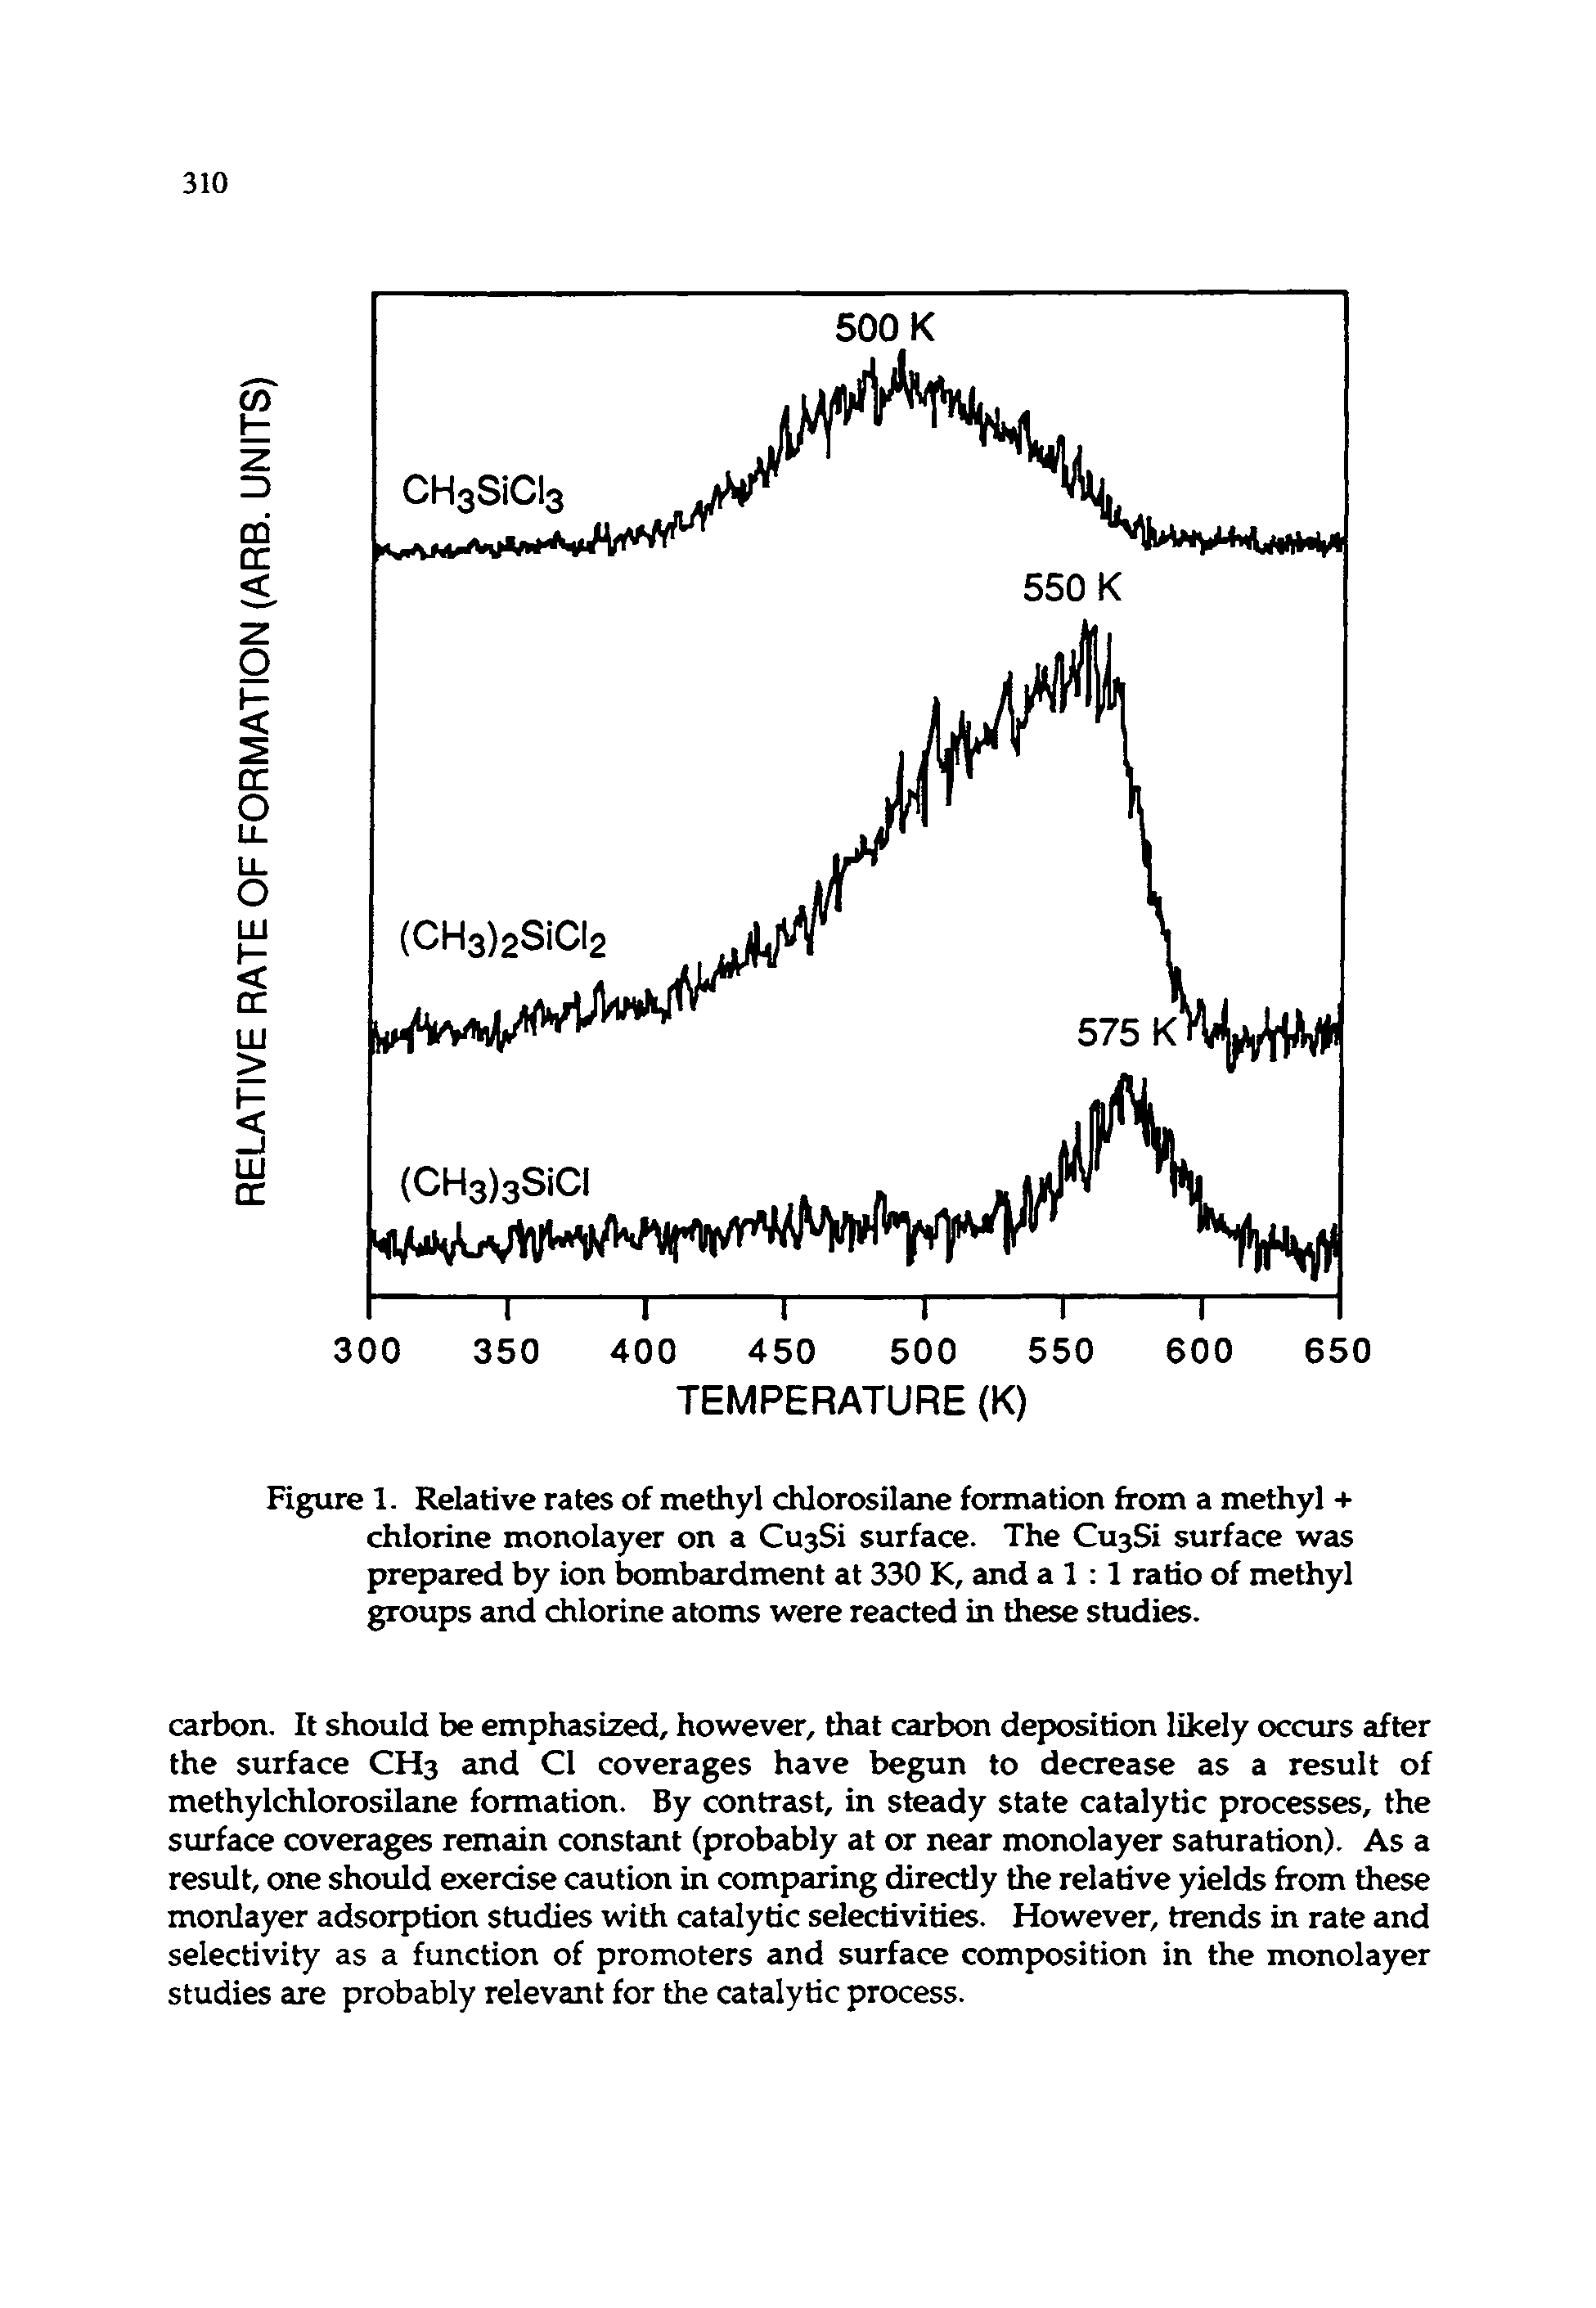 Figure 1. Relative rates of methyl chlorosilane formation from a methyl + chlorine monolayer on a CusSi surface. The Cu3Si surface was prepared by ion bombardment at 330 K, and a 1 1 ratio of methyl groups and chlorine atoms were reacted in these studies.